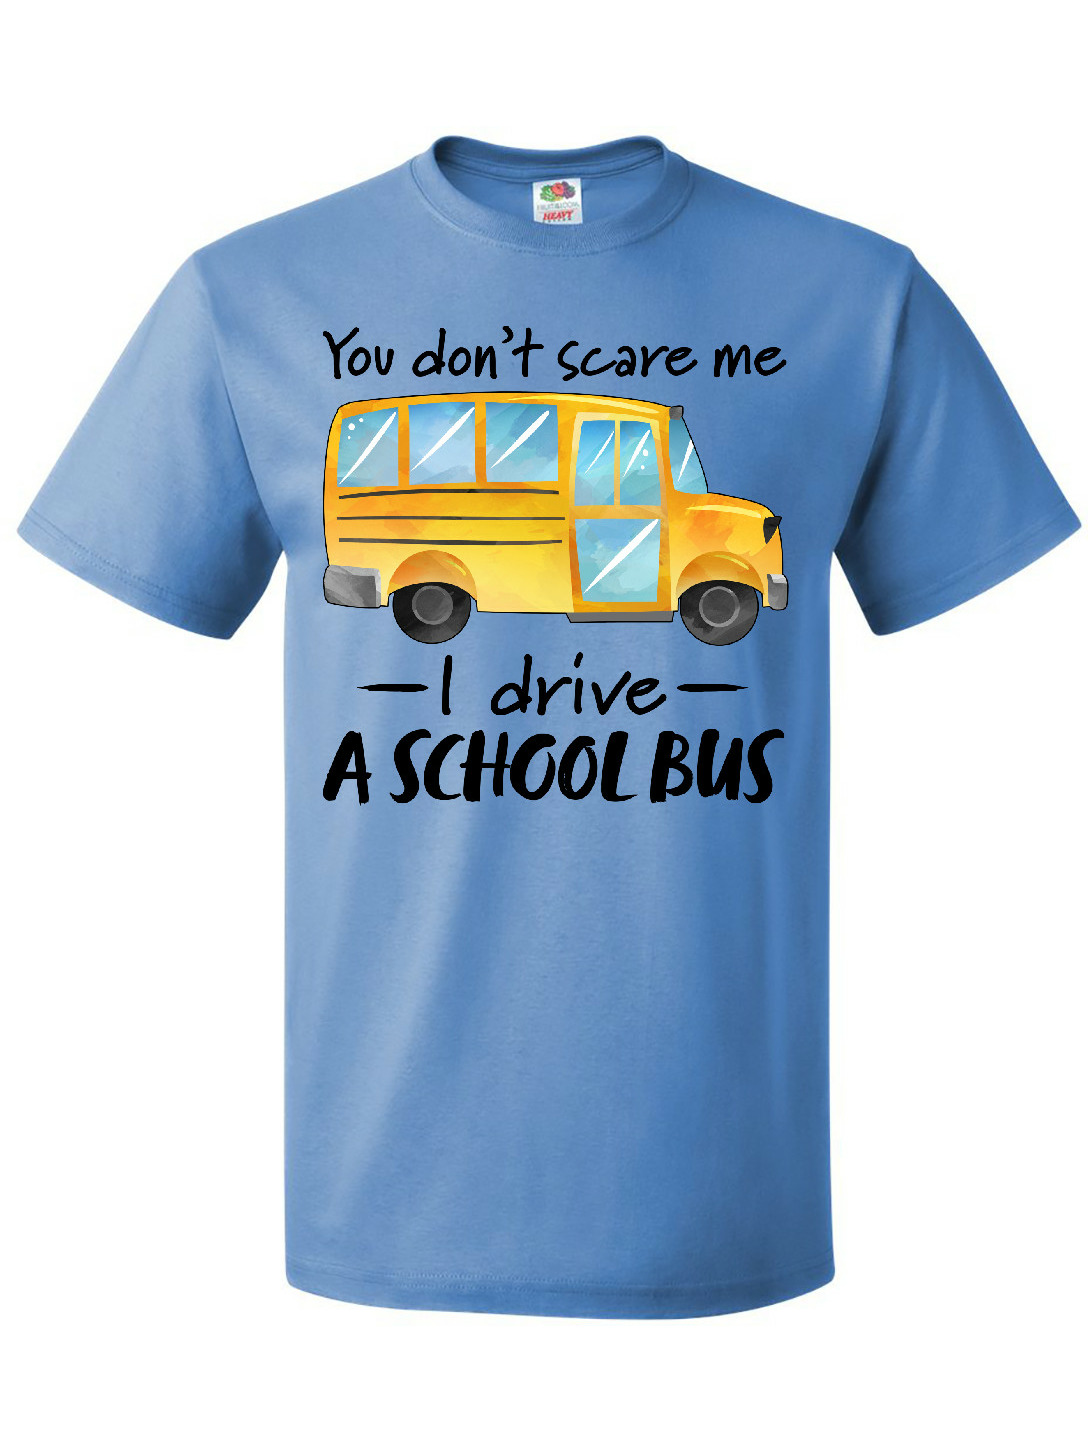 Inktastic You Don't Scare Me- I Drive a School Bus T-Shirt - image 1 of 4